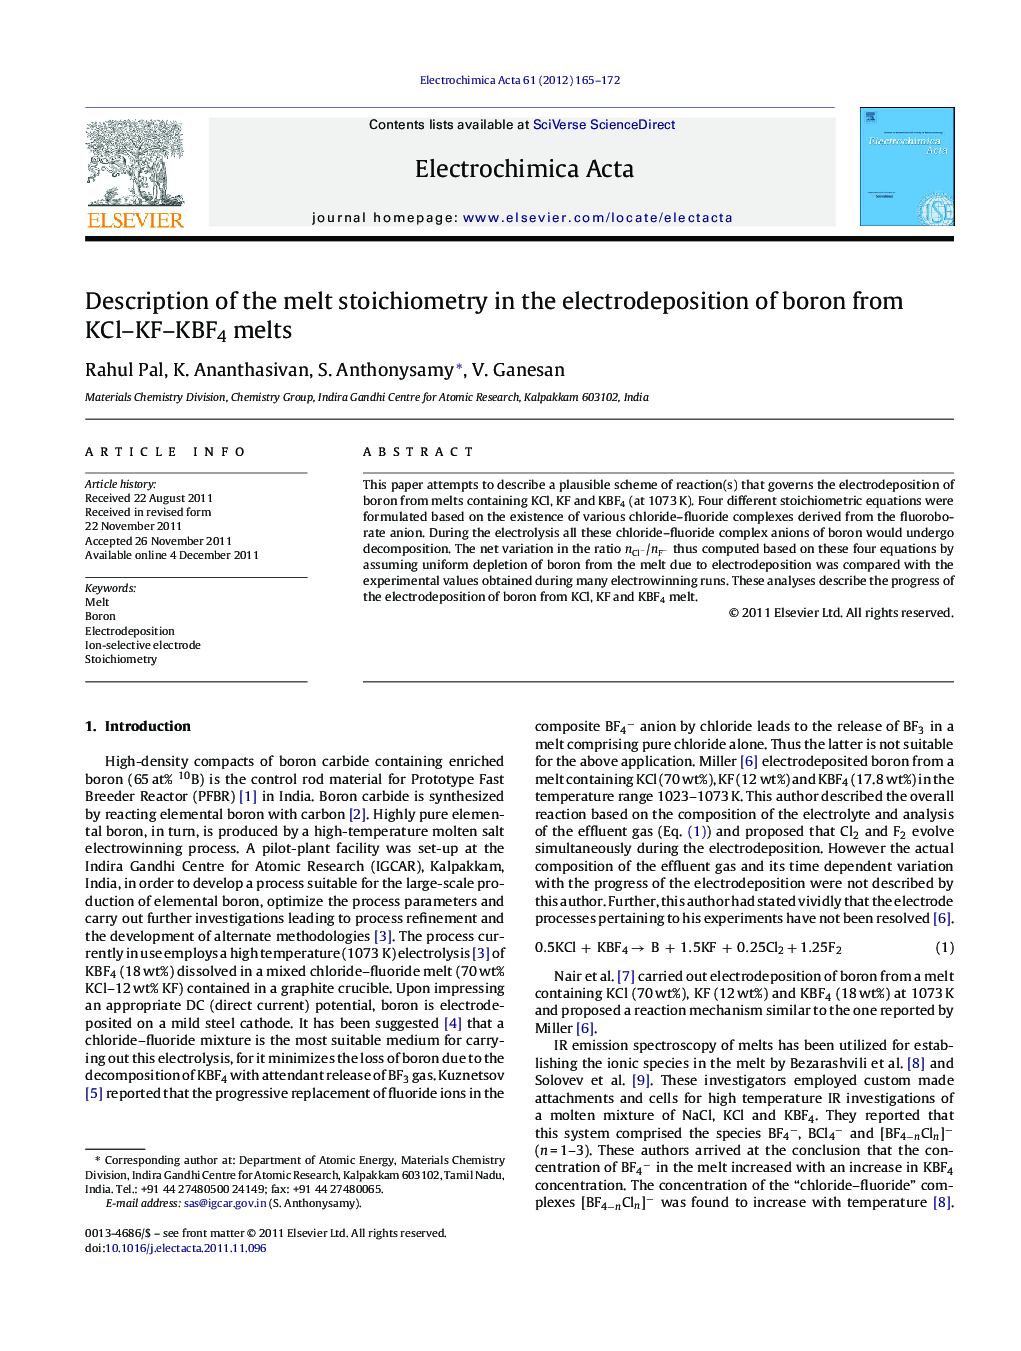 Description of the melt stoichiometry in the electrodeposition of boron from KCl–KF–KBF4 melts